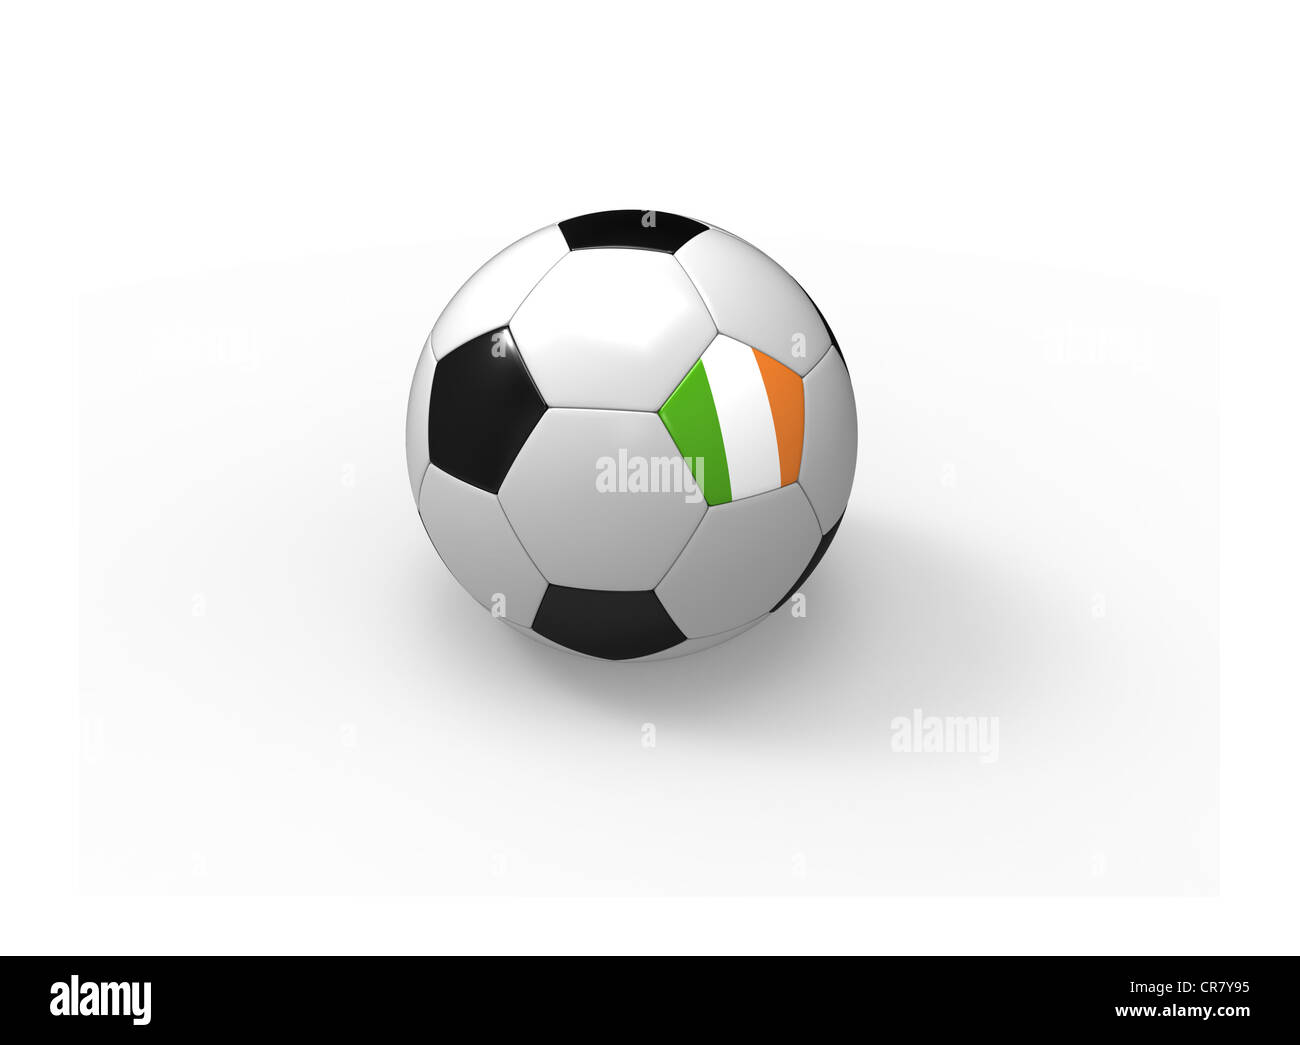 Soccer ball, 3d rendering with Ireland flag, isolated on white background, light shadow Stock Photo